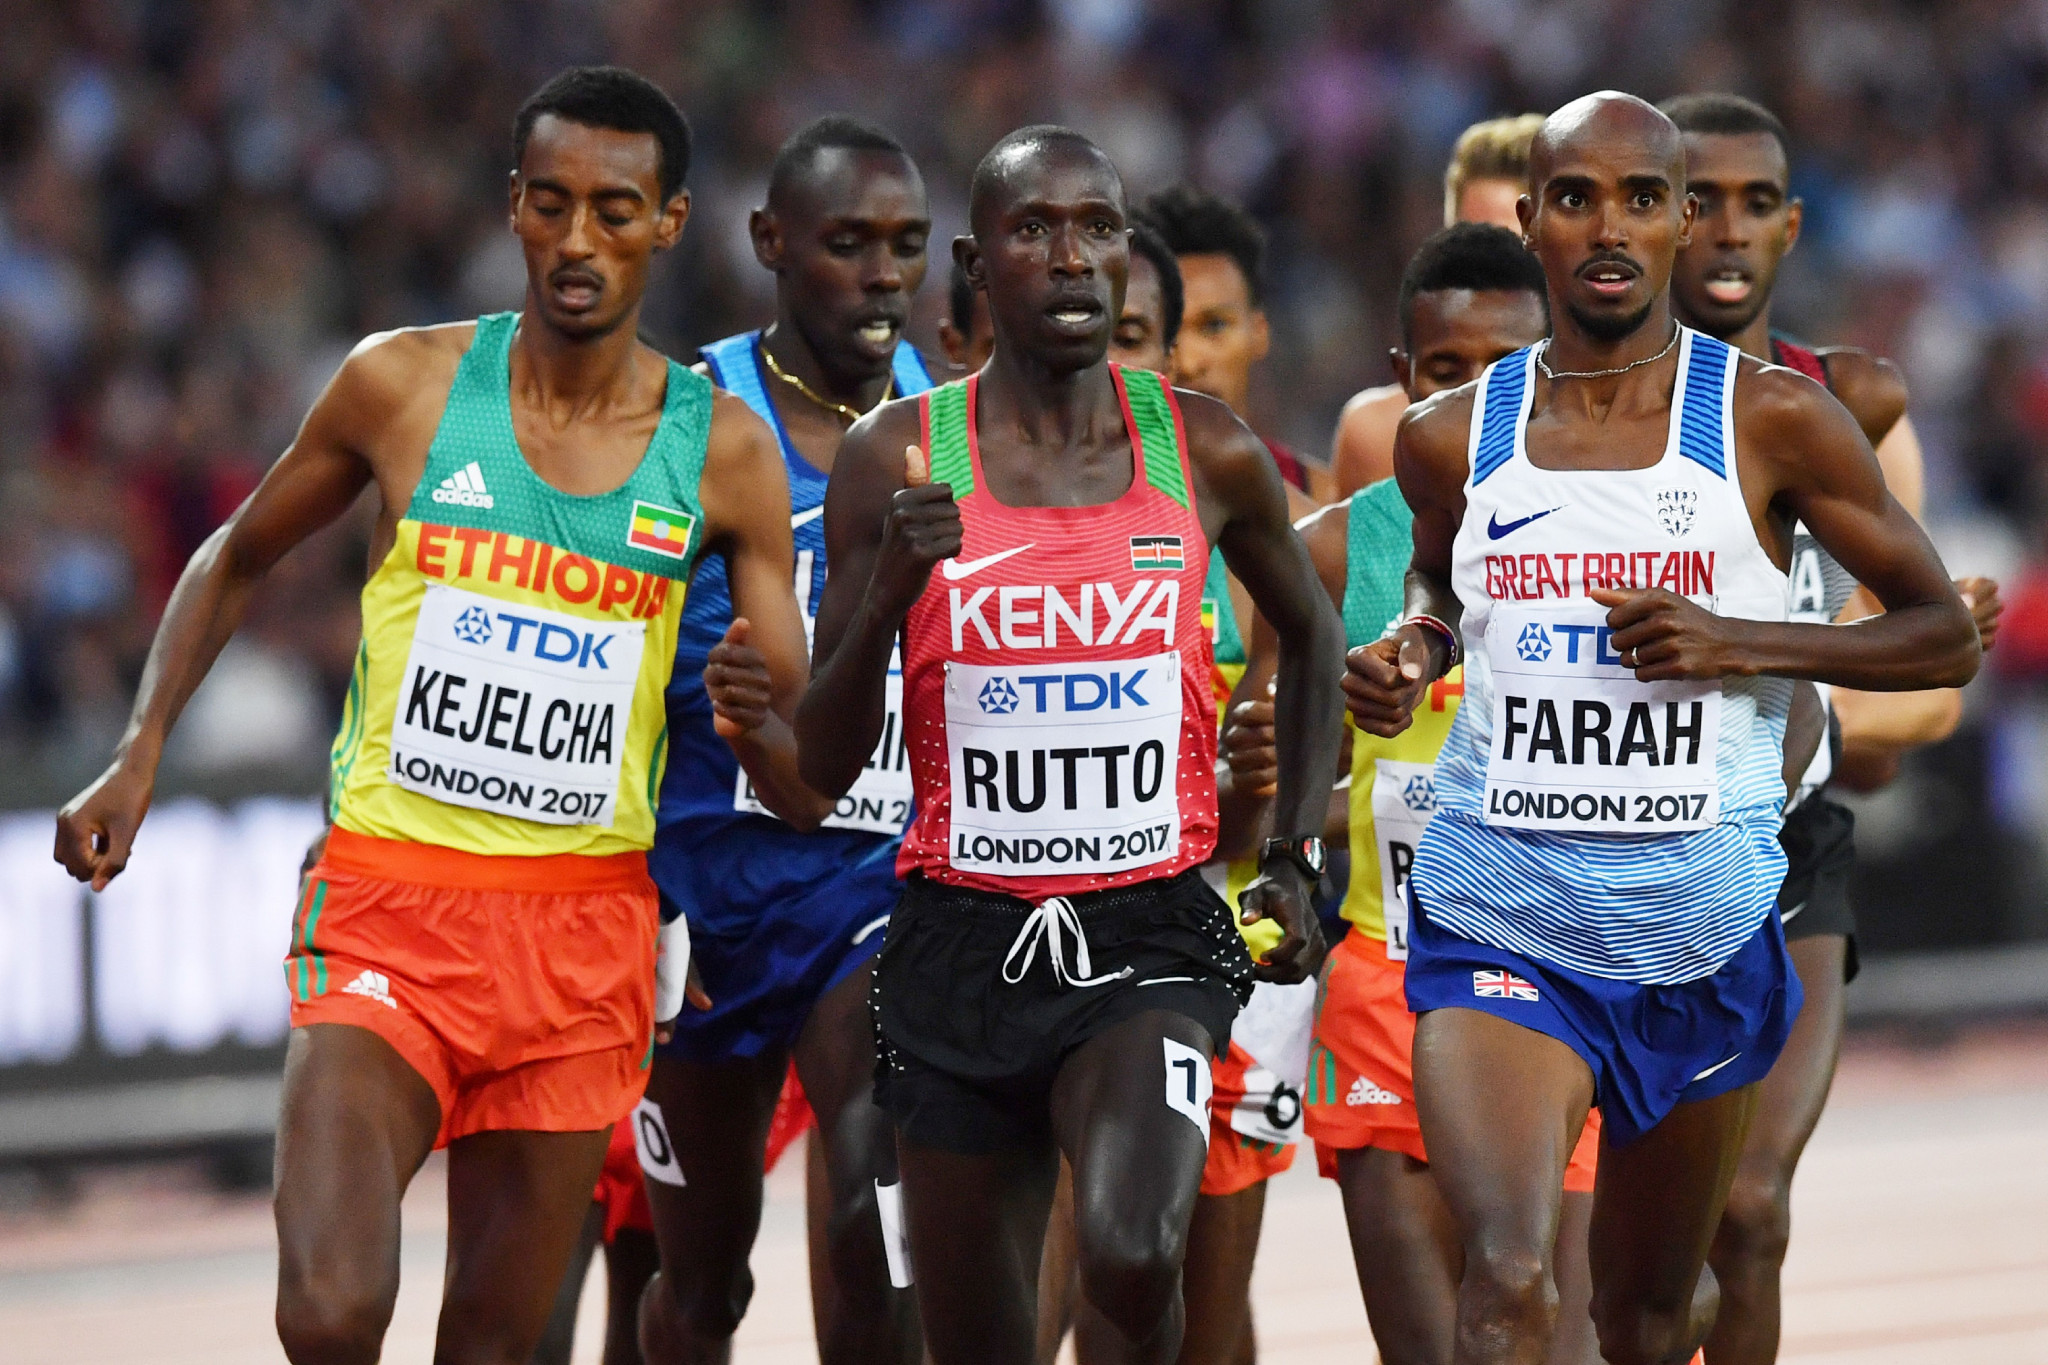 Cyrus Rutto has become the latest Kenyan distance runner to be provisionally suspended in a doping case ©Getty Images